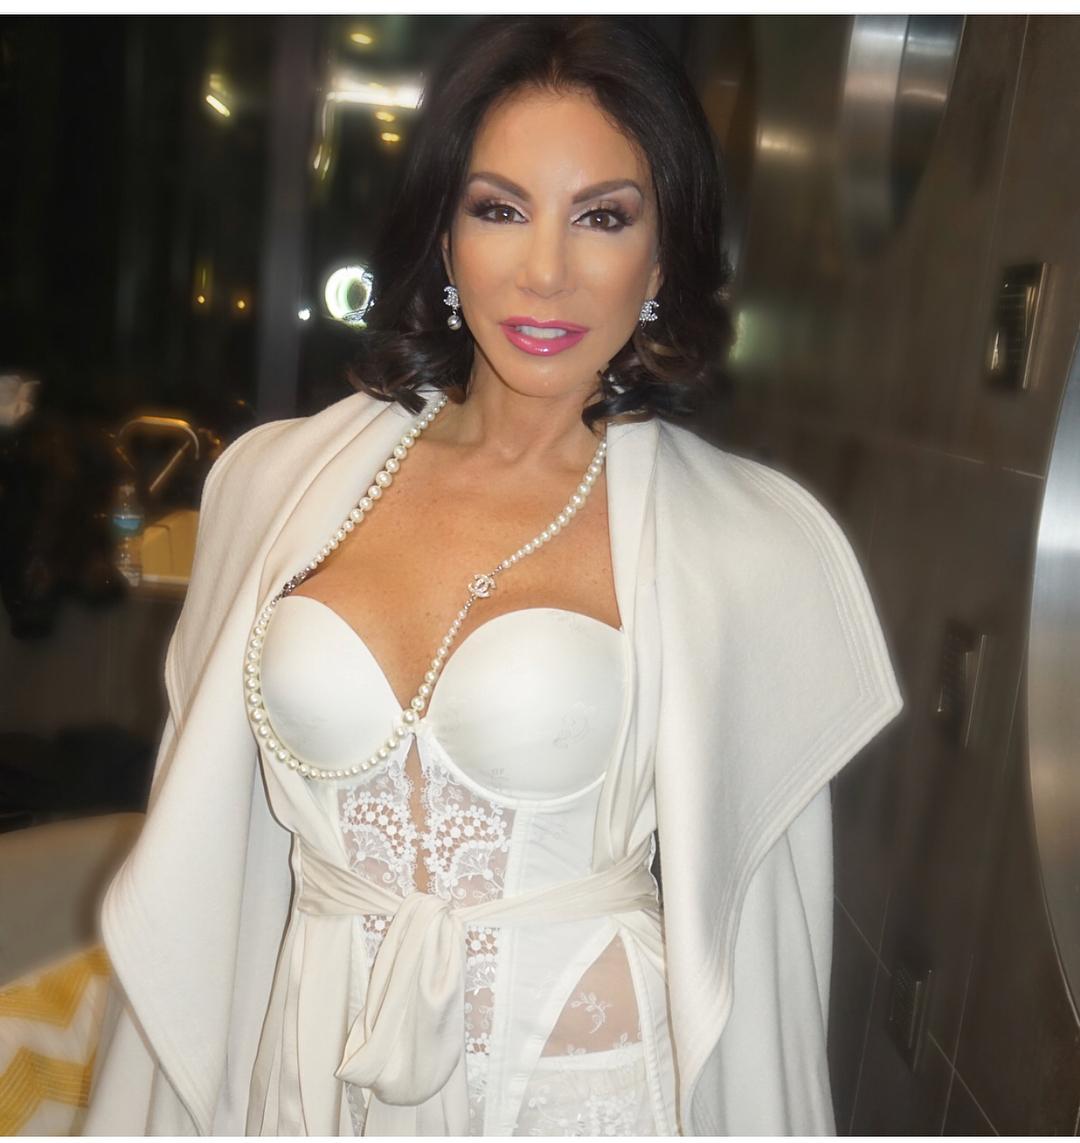 49 Hot Pictures Of Danielle Staub Will Make You Fall In With Her Sexy Body | Best Of Comic Books